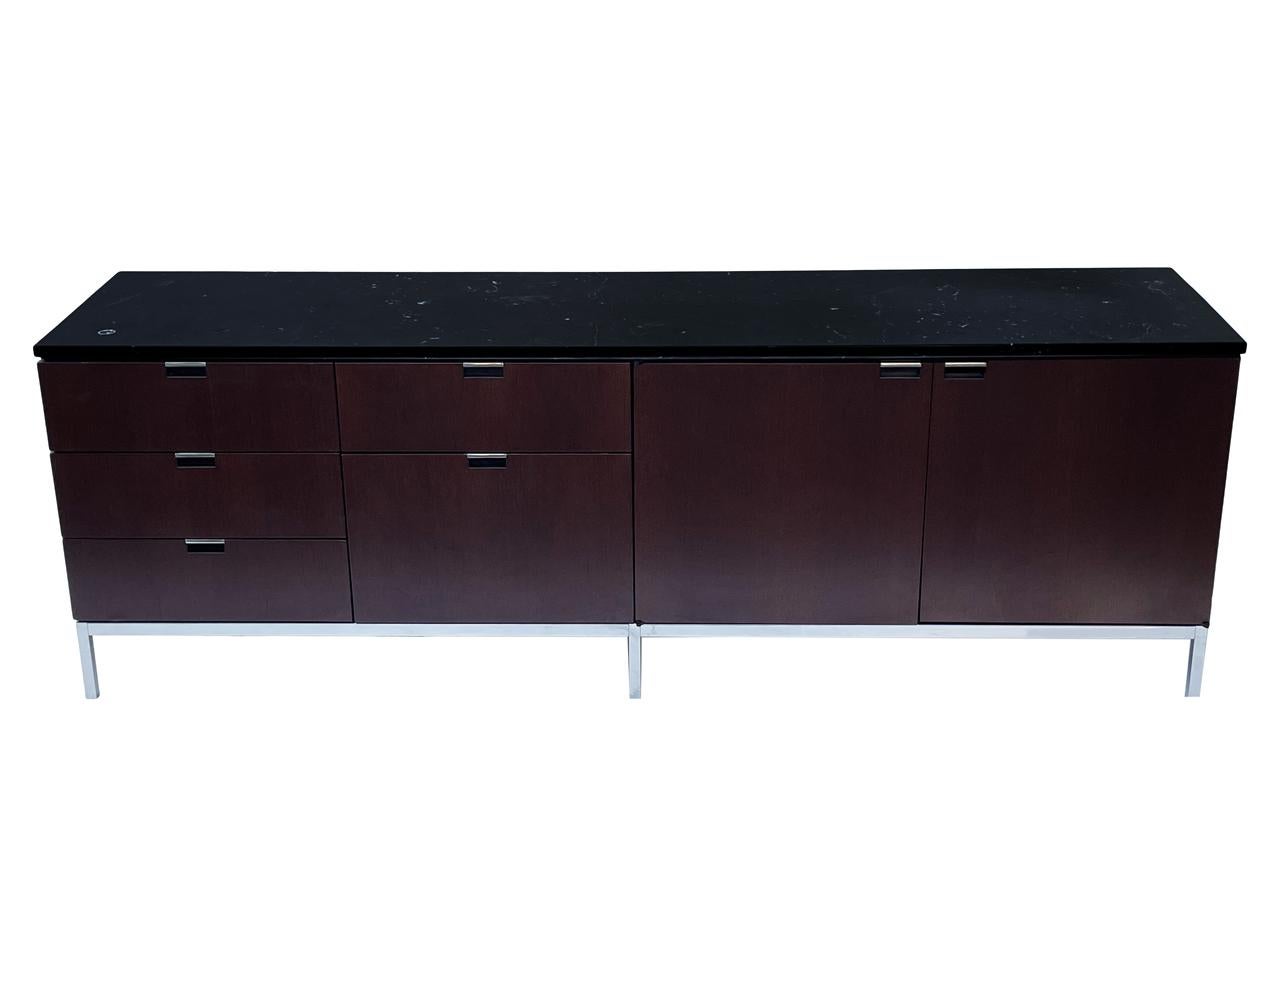 A sleek modern classic cabinet designed by Florence Knoll and produced by Knoll. It features a dark mahogany case, stainless steel legs and a black marble top.